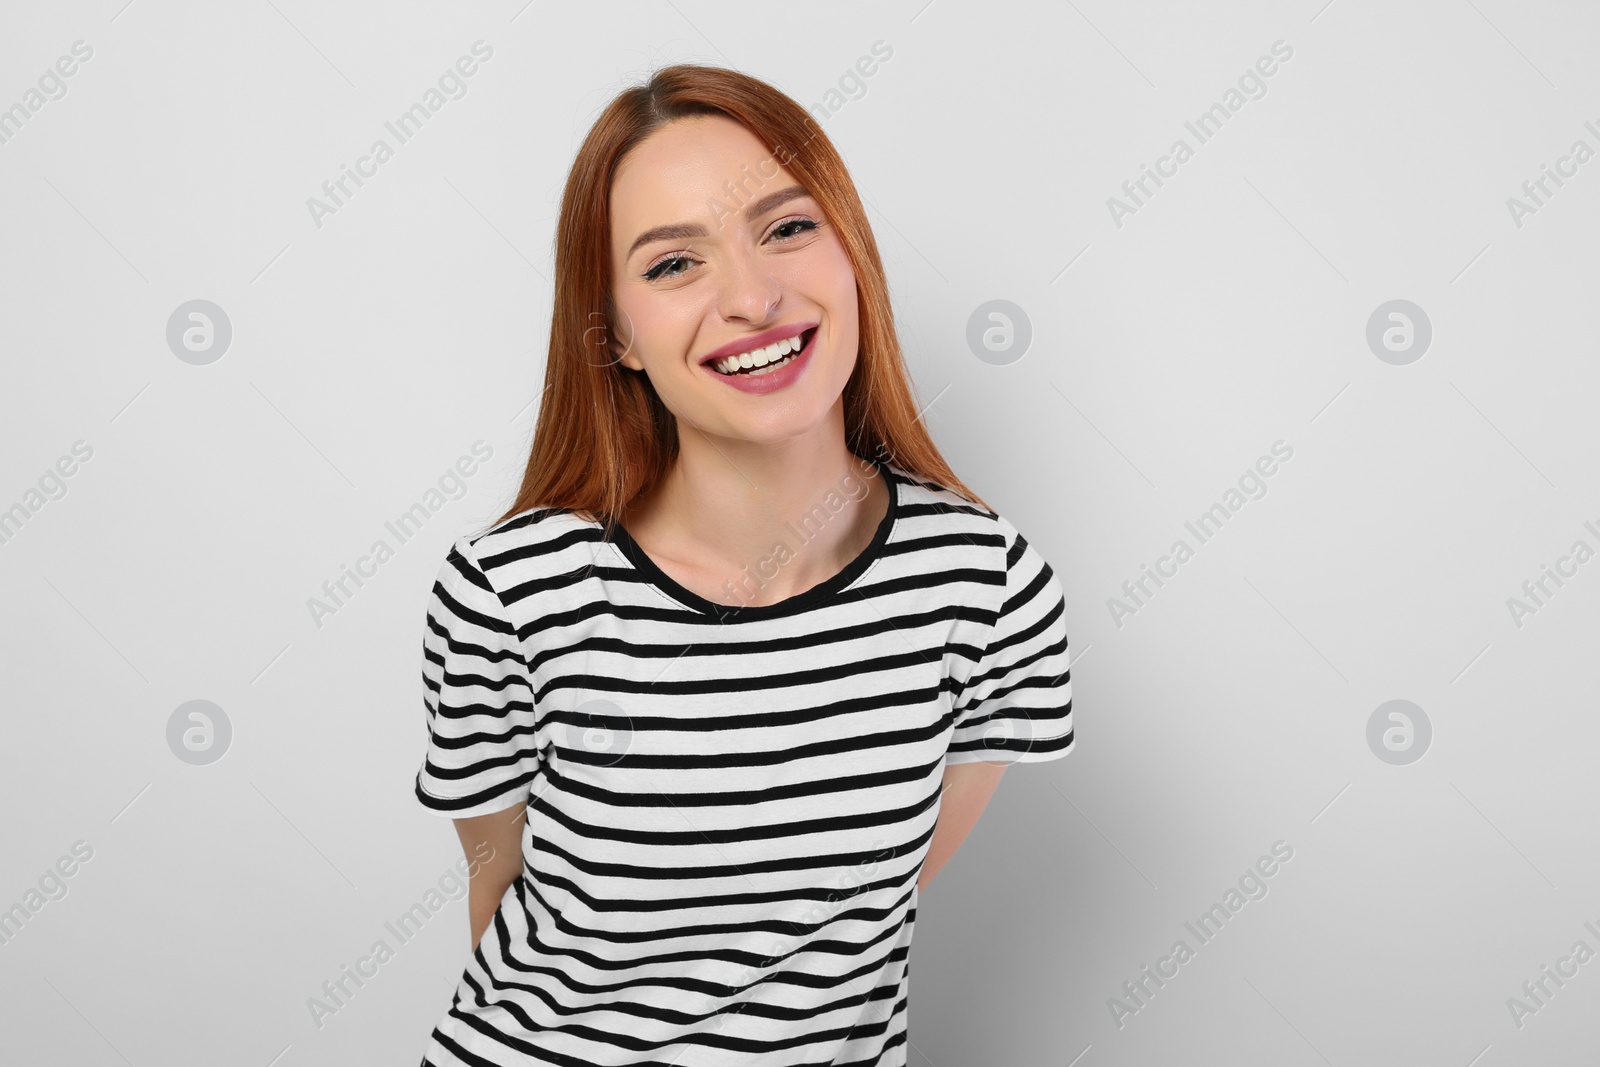 Photo of Portrait of beautiful young woman on light gray background